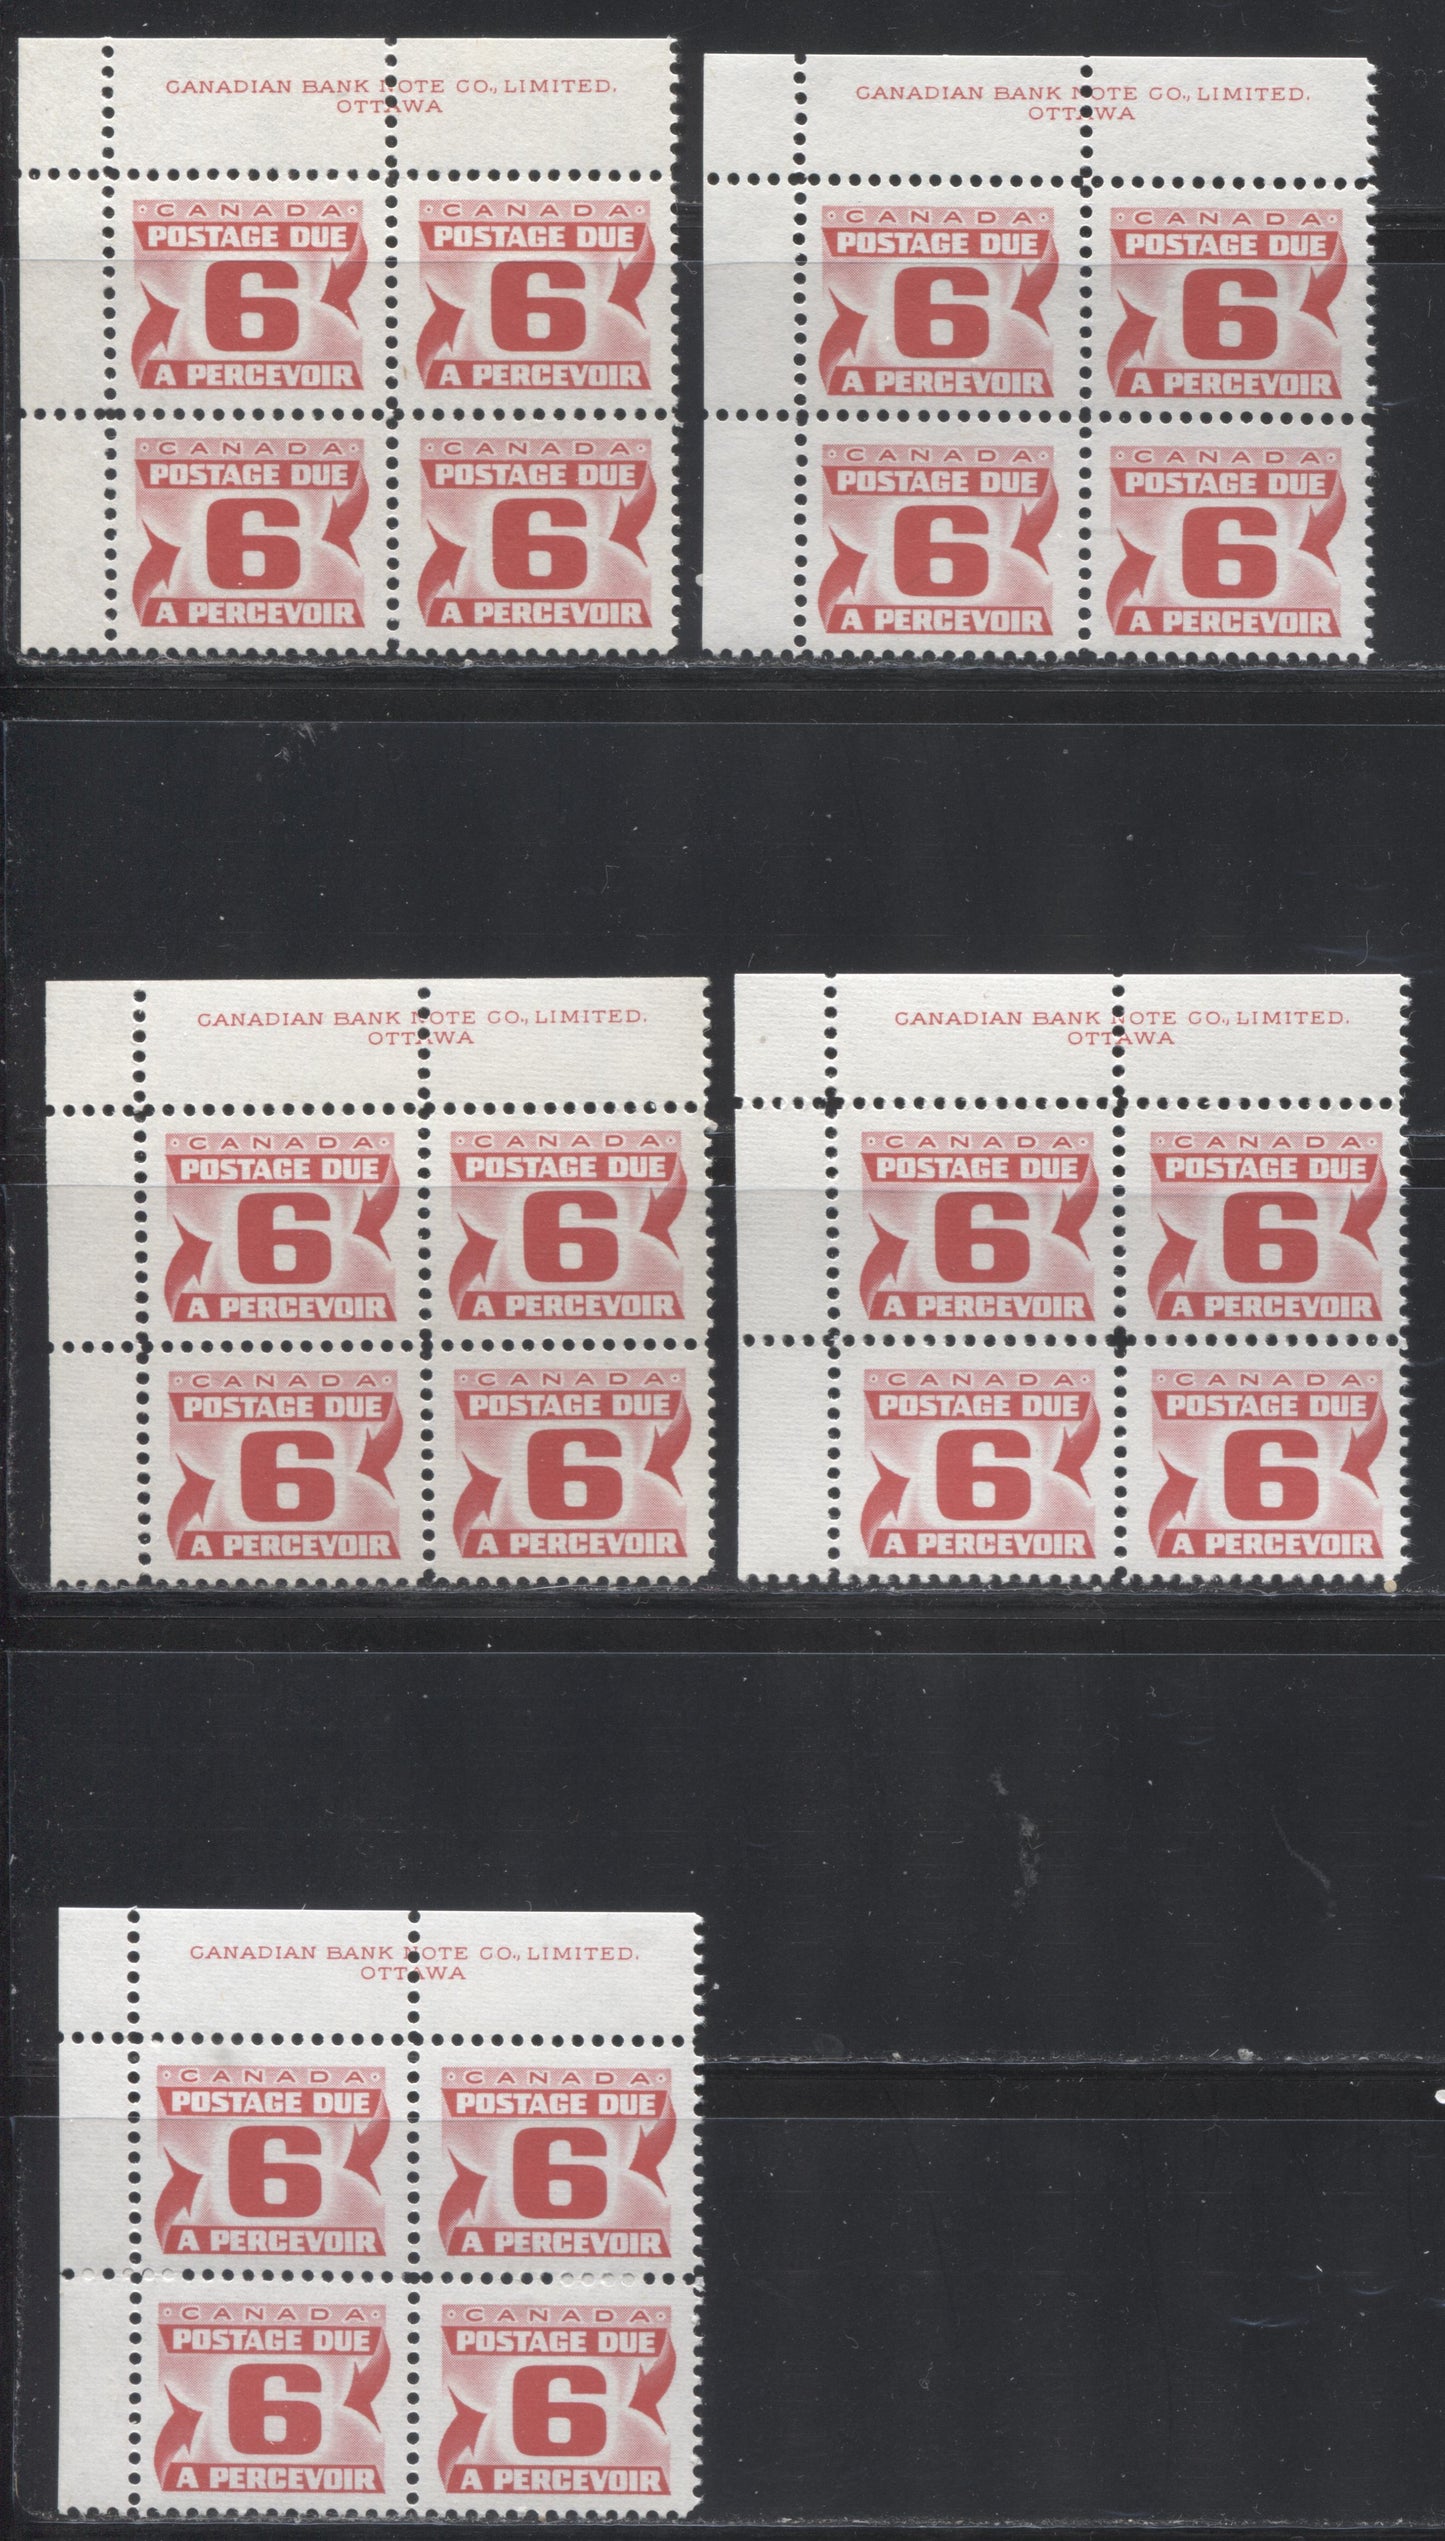 Lot 104 Canada #J33,i,iii 6c Carmine Rose 1973-1977, 3rd Centennial Postage Due Issue, Five VFNH UL Inscription Blocks Of 4 On DF & LF-fl Ivory, Bluish & Bluish White Smooth And Ribbed Papers With PVA Gum, Perf 12